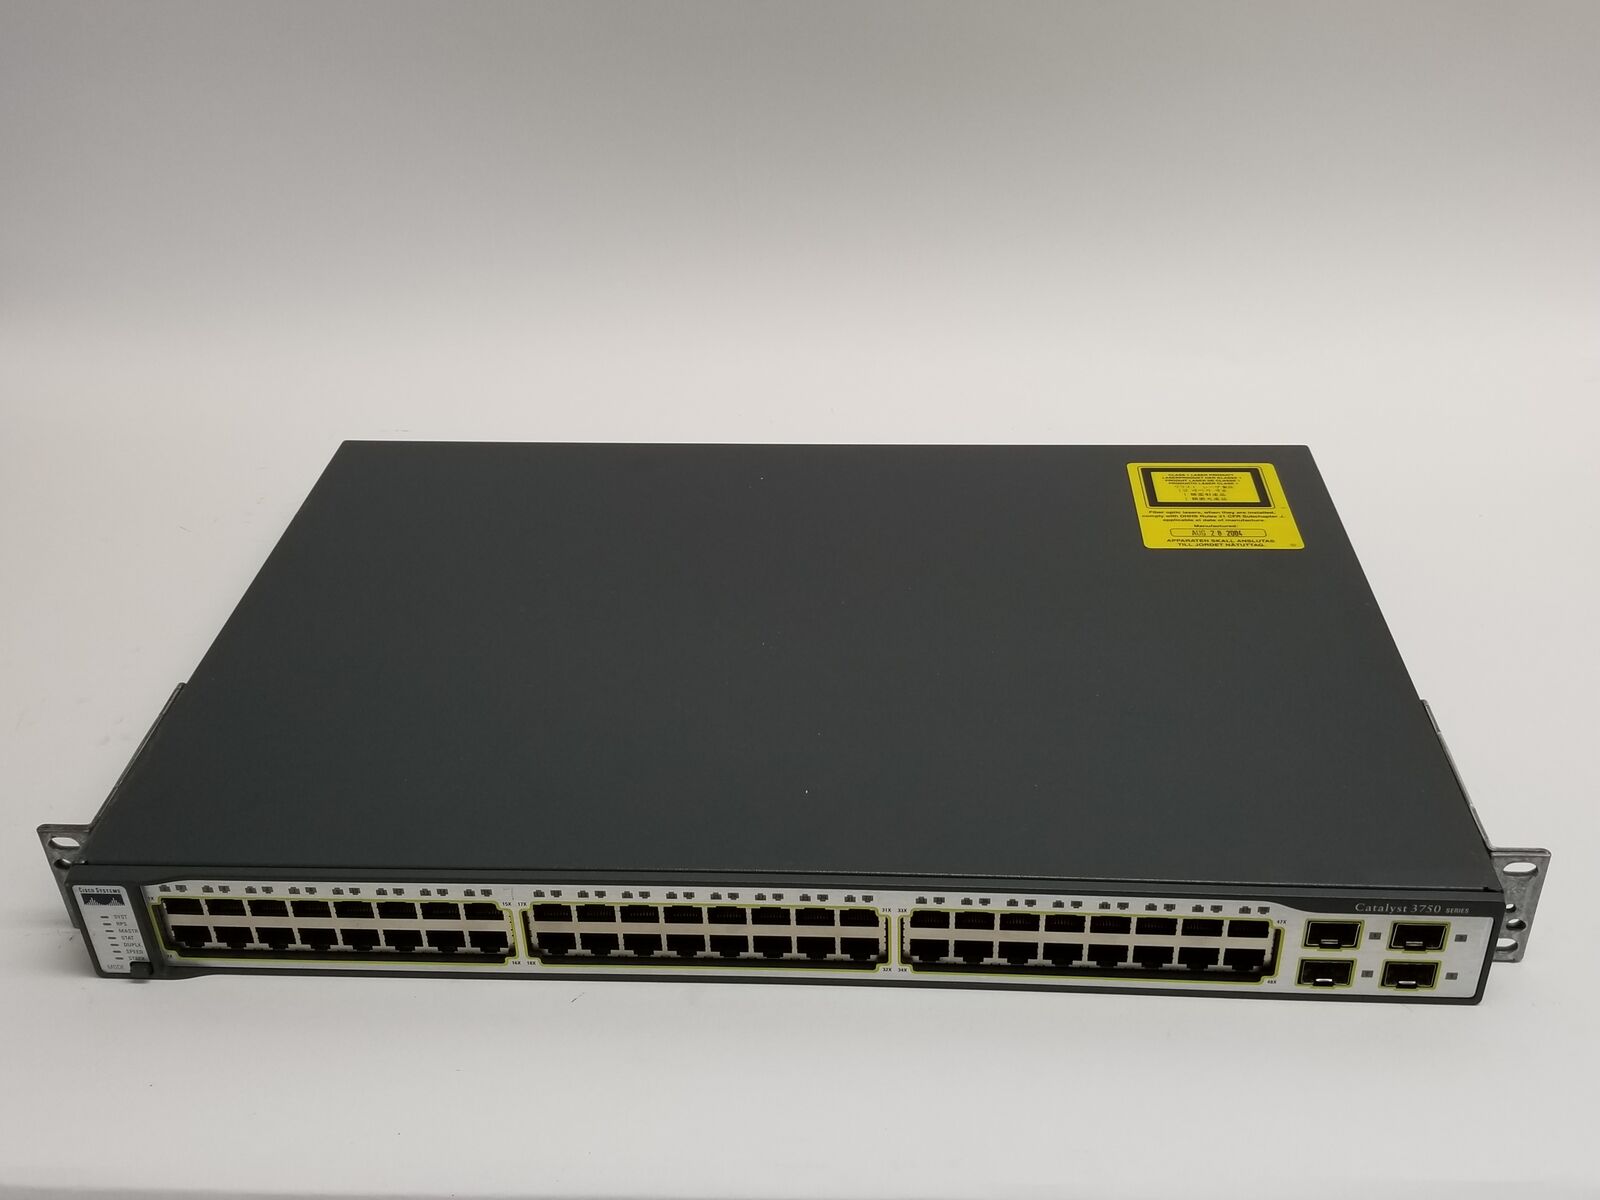 Cisco Catalyst 3750 WS-C3750-48TS-S 48-Port Fast Managed Ethernet Switch